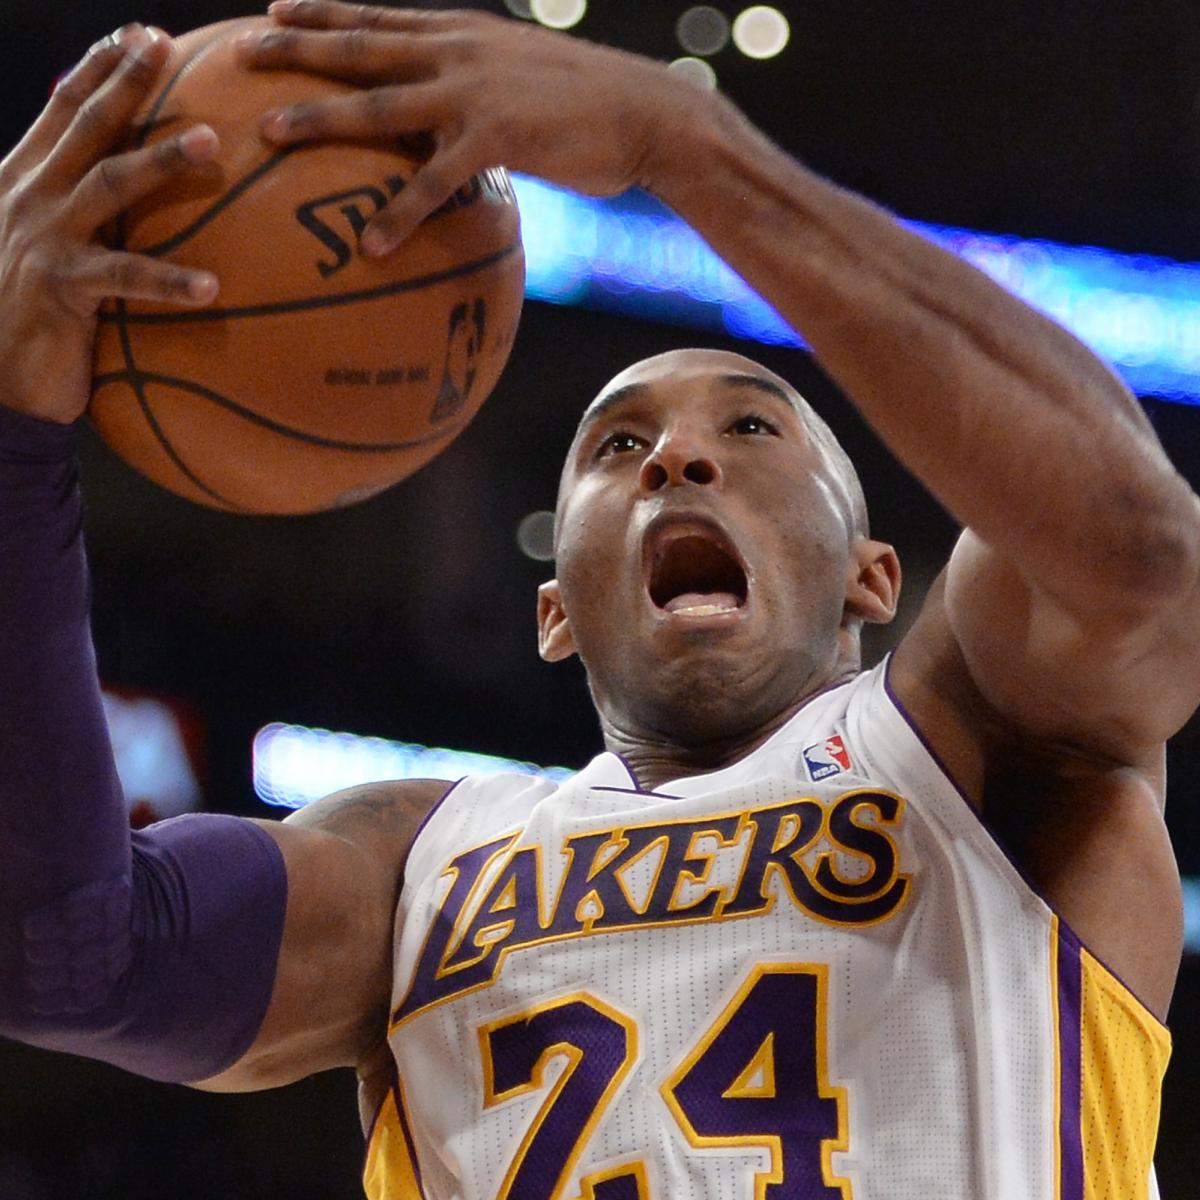 After 8 Months Away, Kobe Bryant's Rusty Return Hardly a Shock | News ...